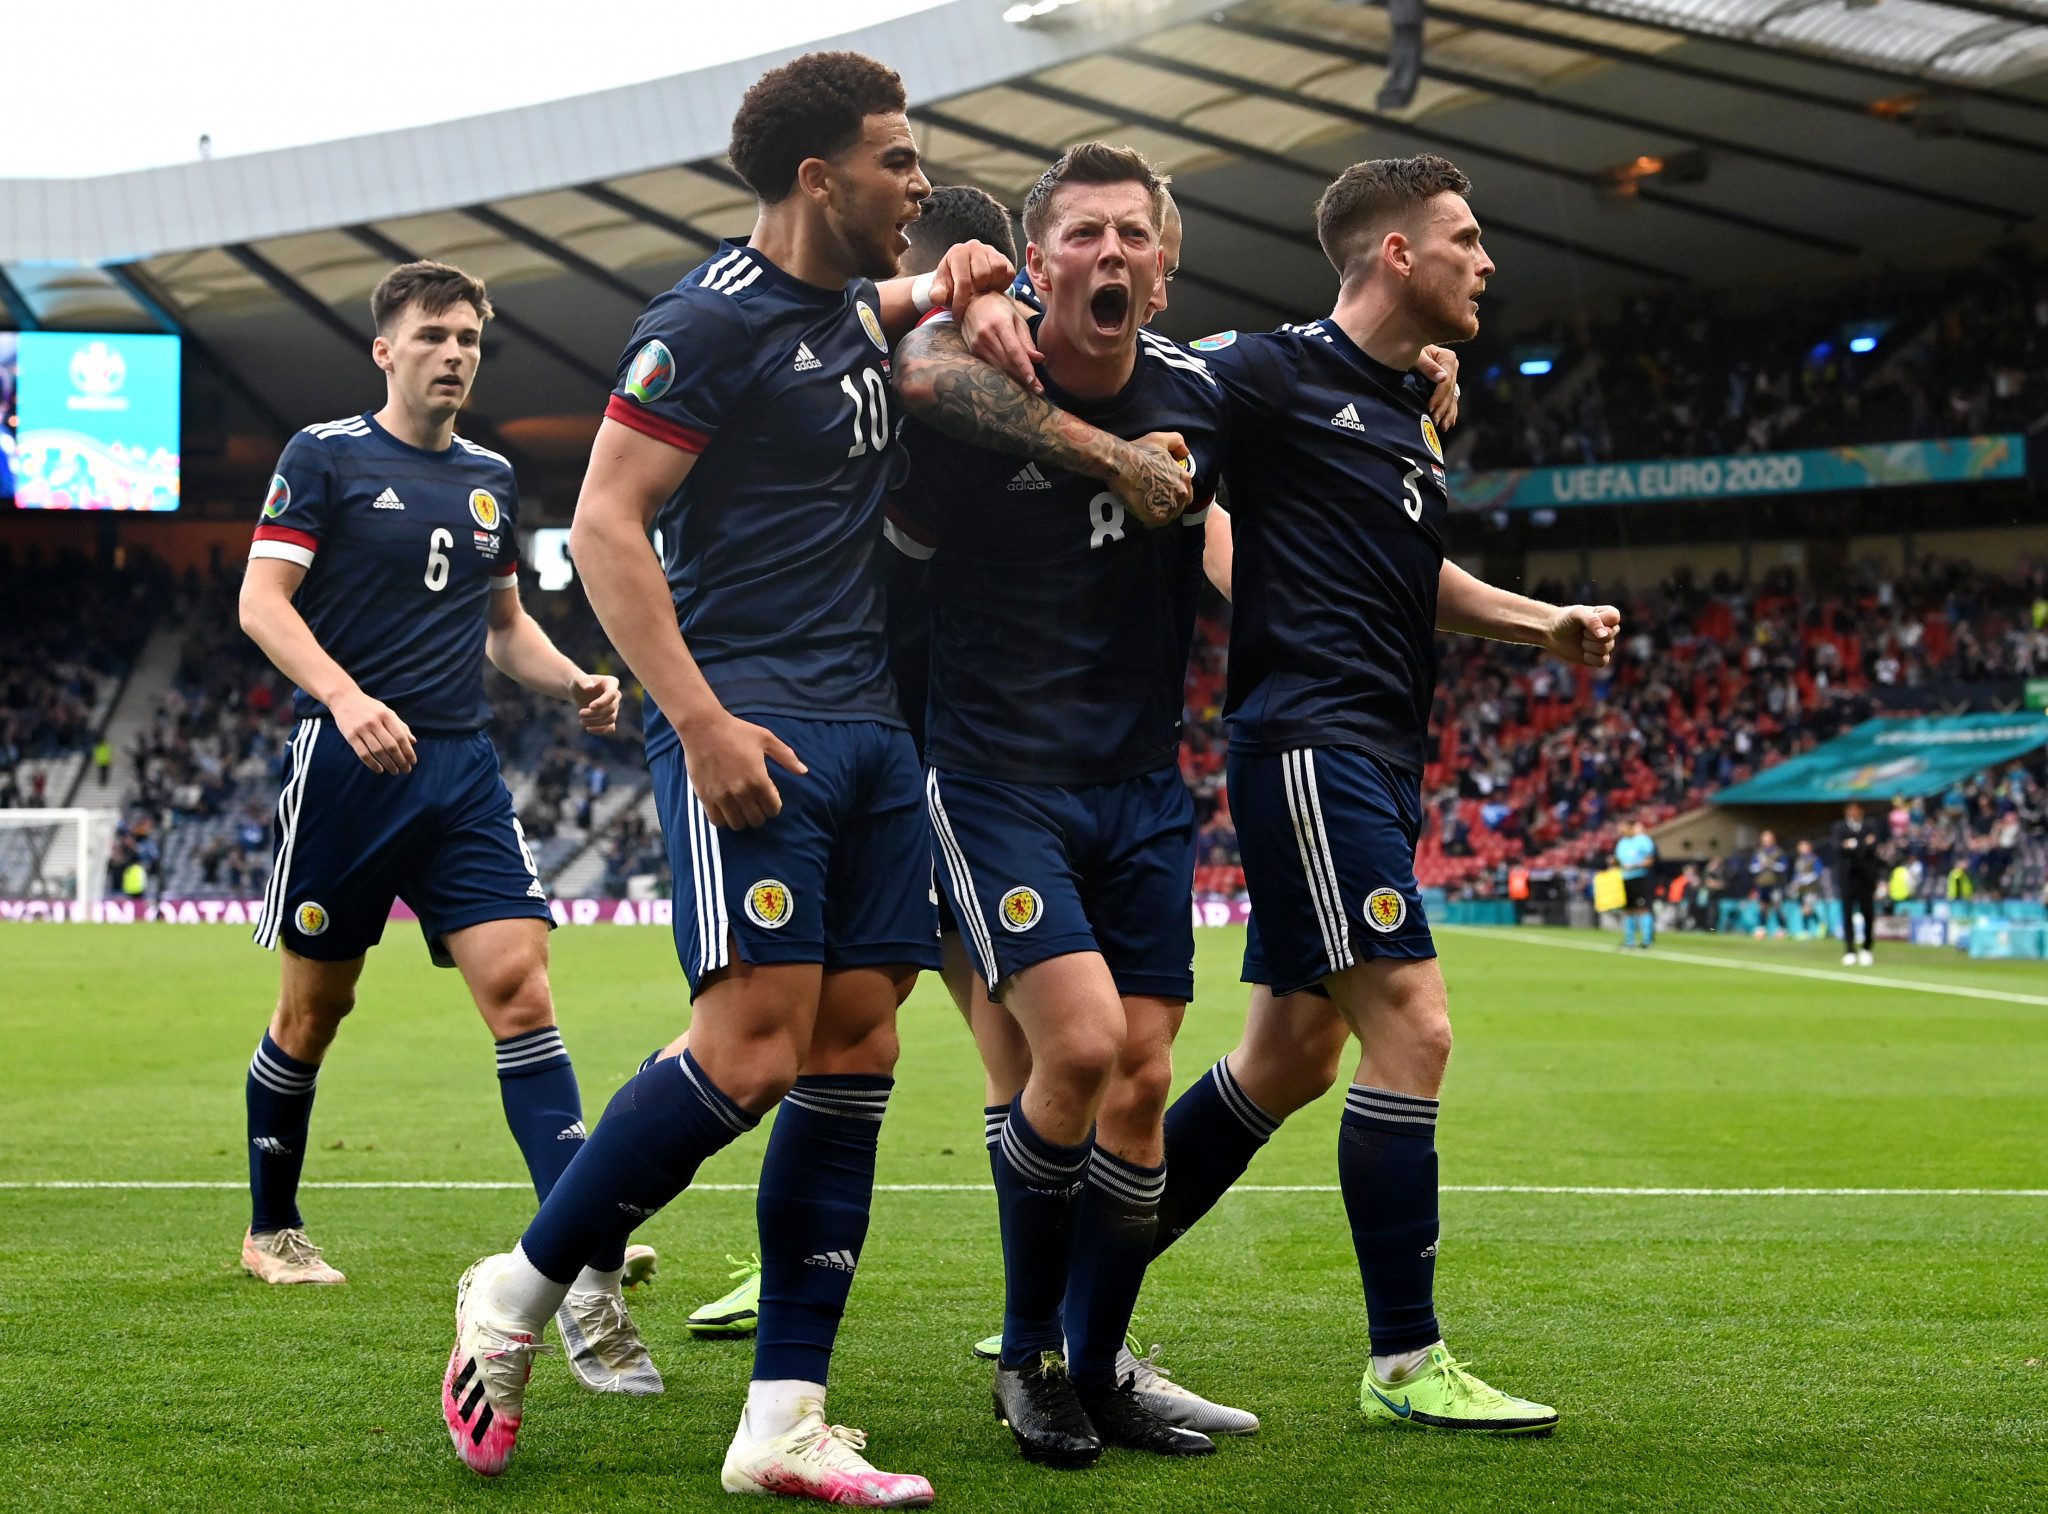 Scotland are set to play Poland in an international friendly later this month, with donations from each ticket set to go towards UNICEF's humanitarian response in Ukraine ©Getty Images